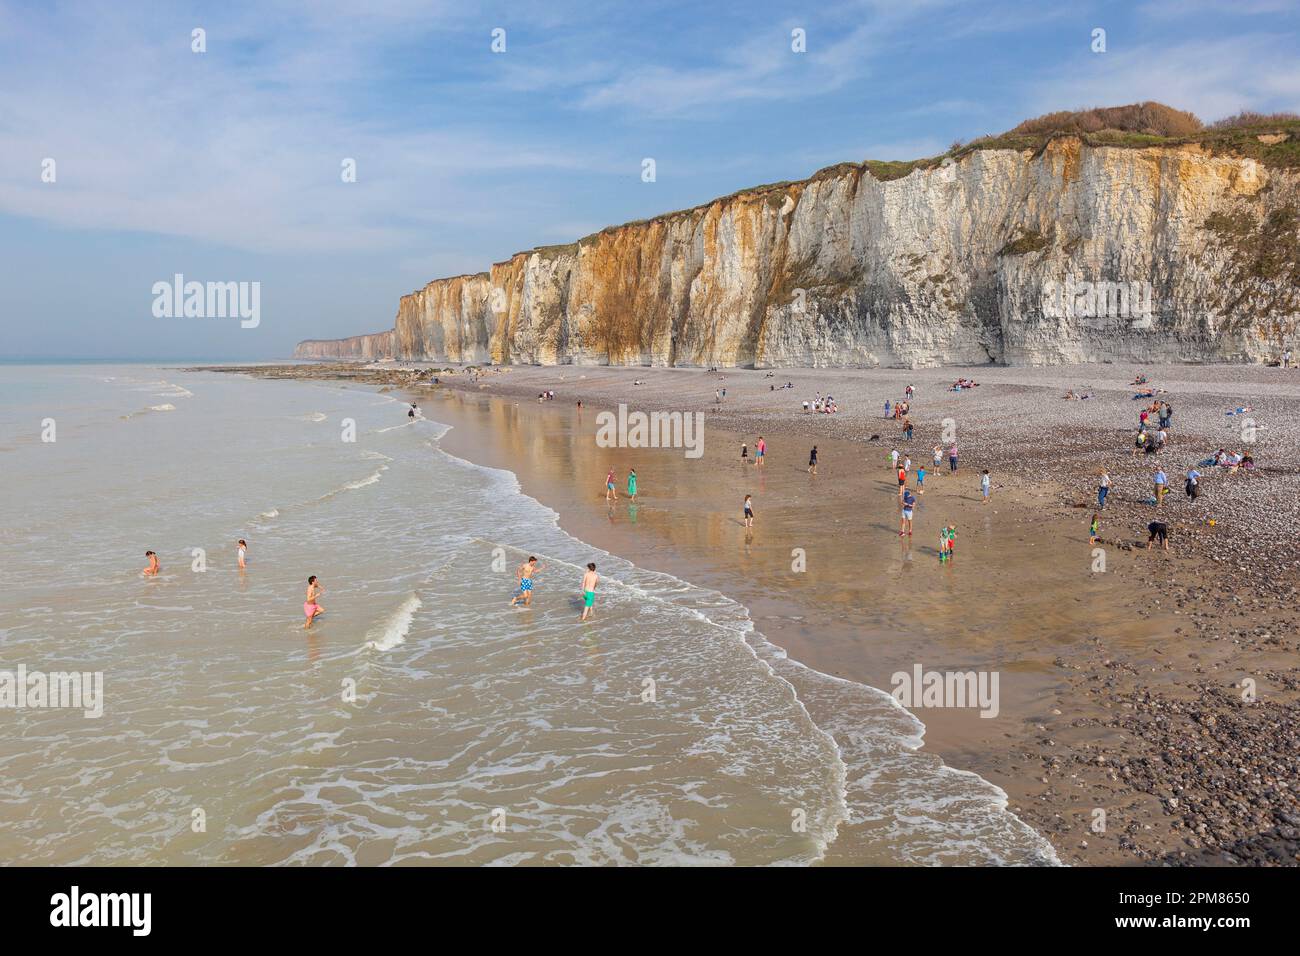 France, Seine-Maritime, Veules-les-Roses, listed as one of the Most Beautiful Villages of France, tourists enjoying bathing in the sea, at the bottom of white cliffs Stock Photo